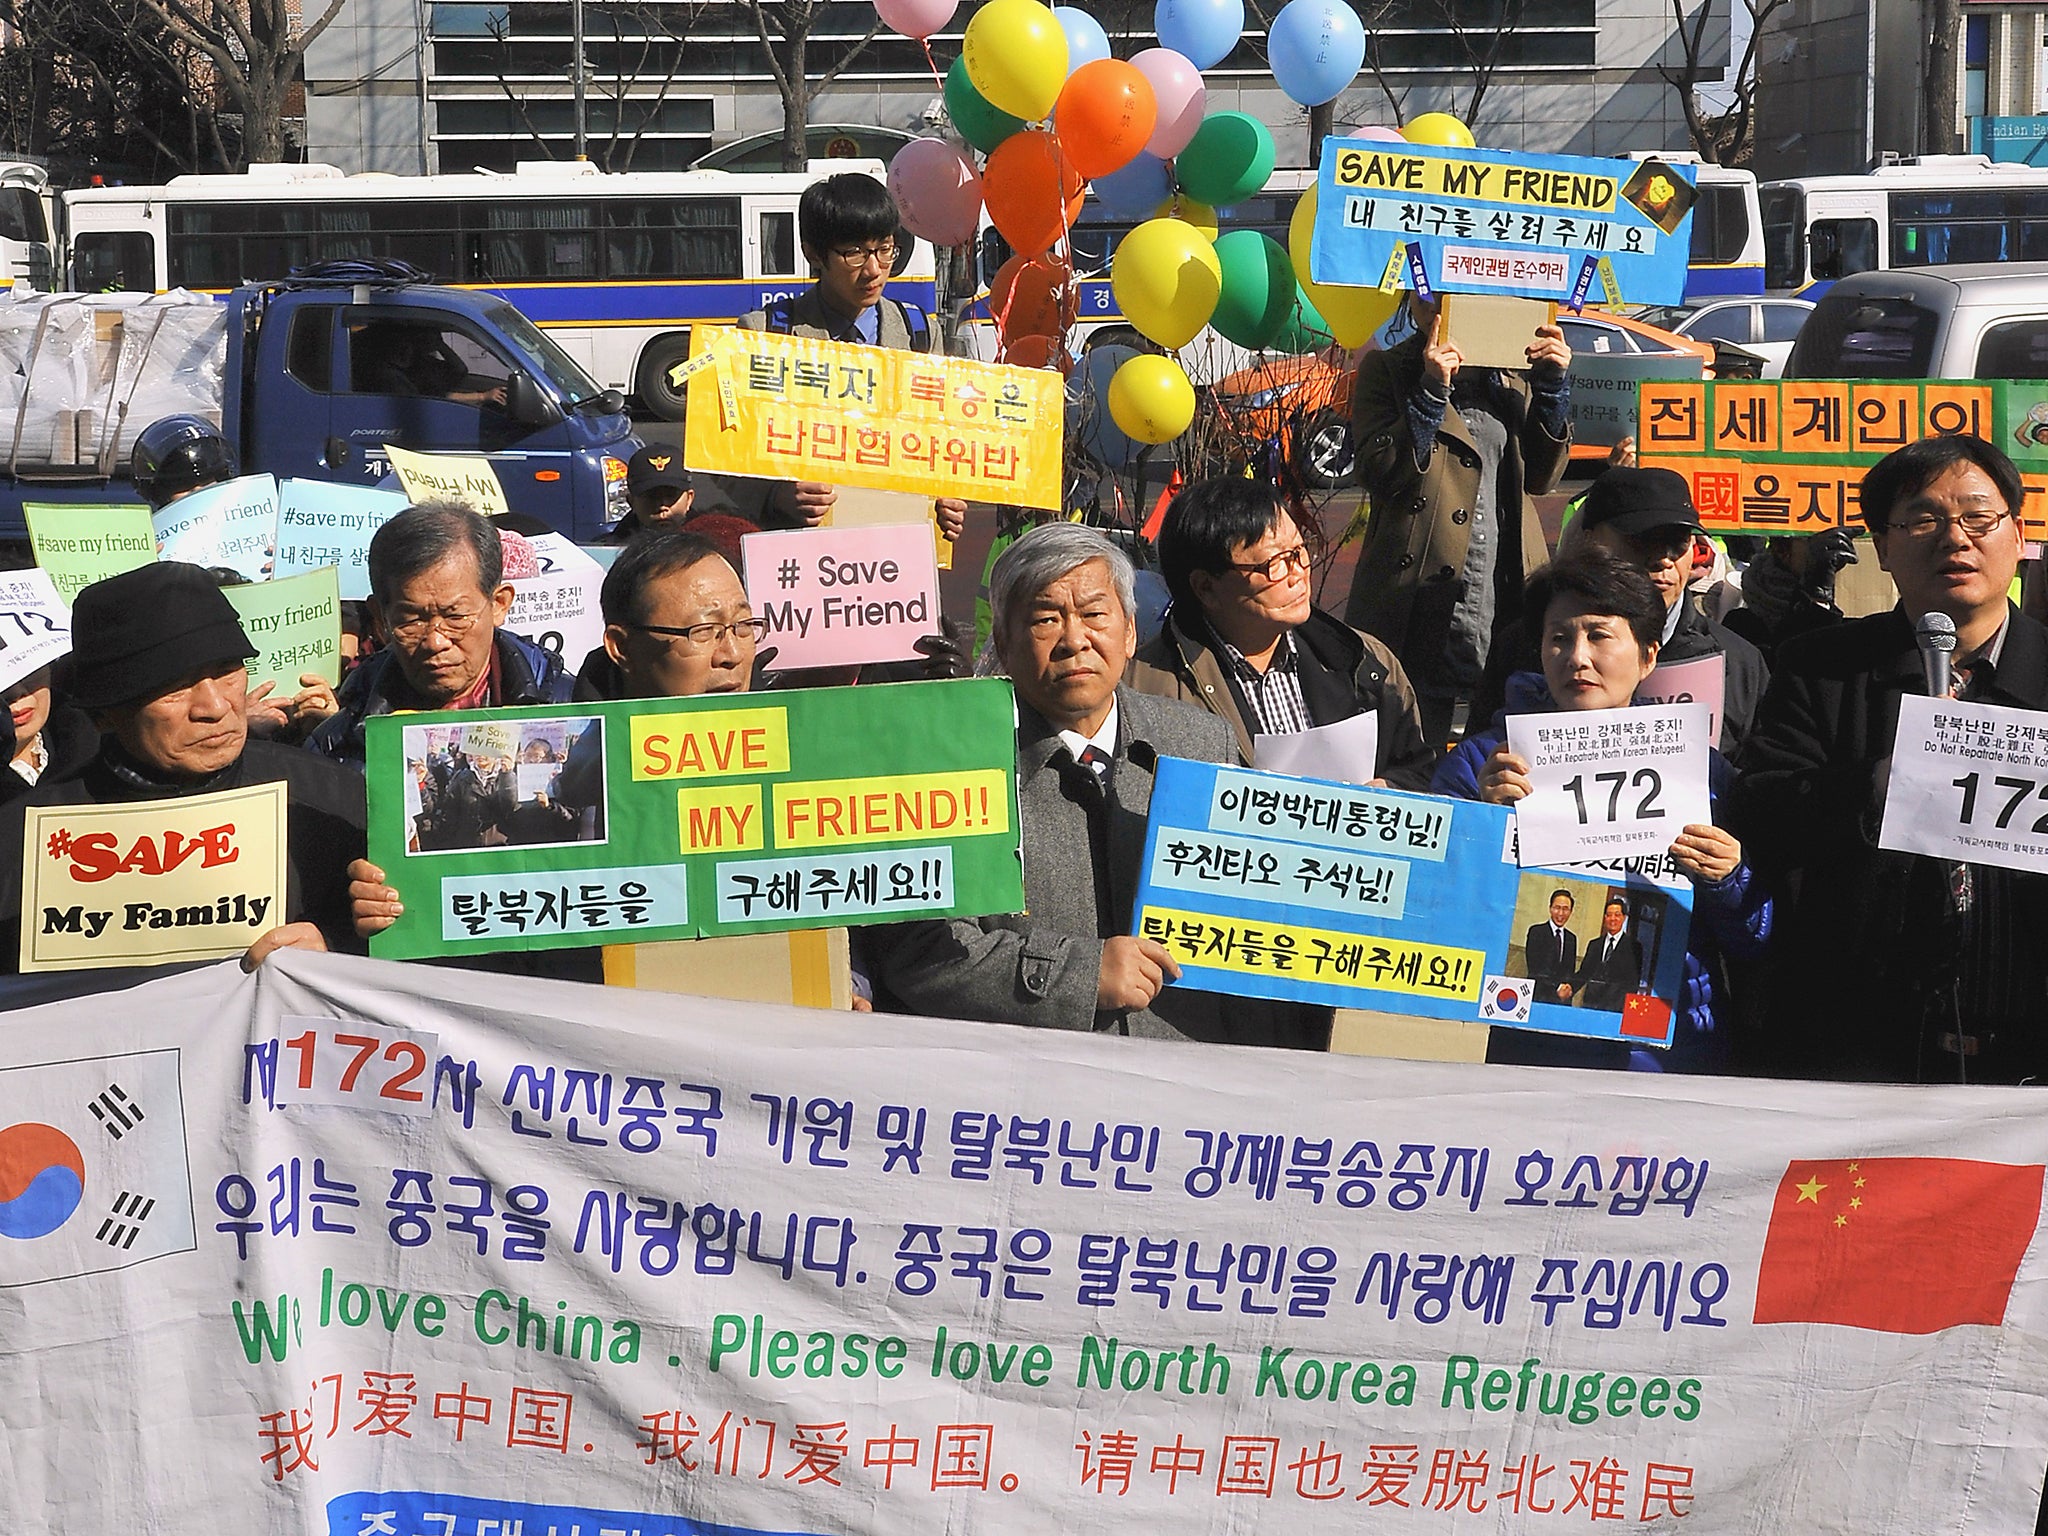 South Korean human rights activists advocate for refugees (Getty)